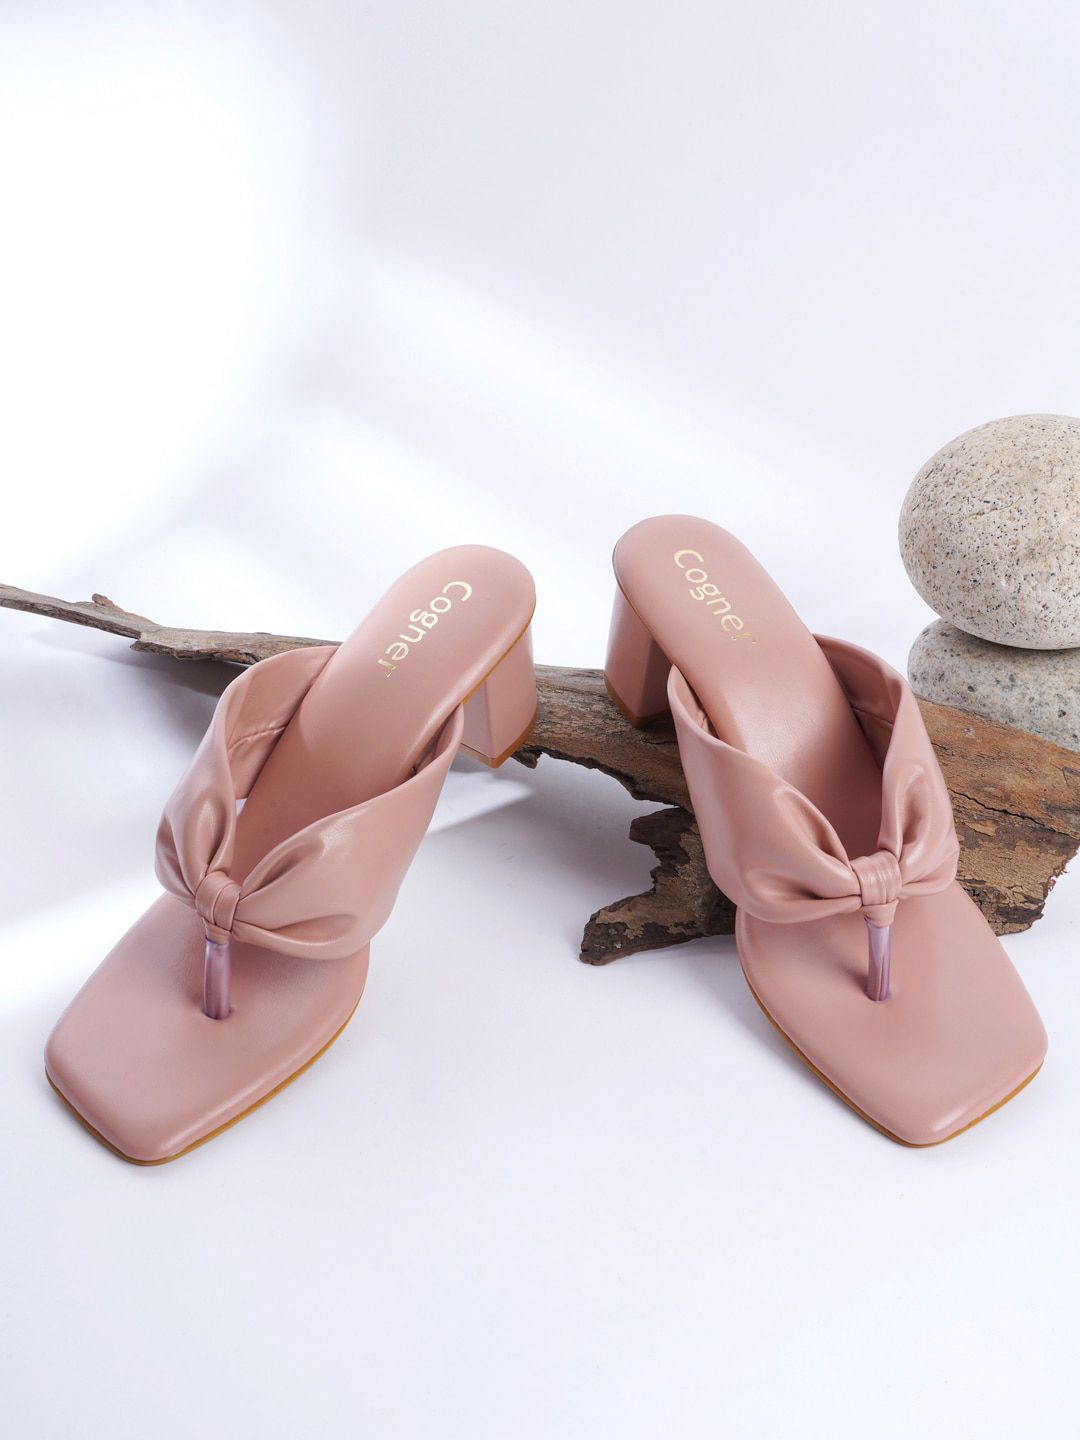 Cogner Beige Textured Party Block Pumps with Bows Price in India